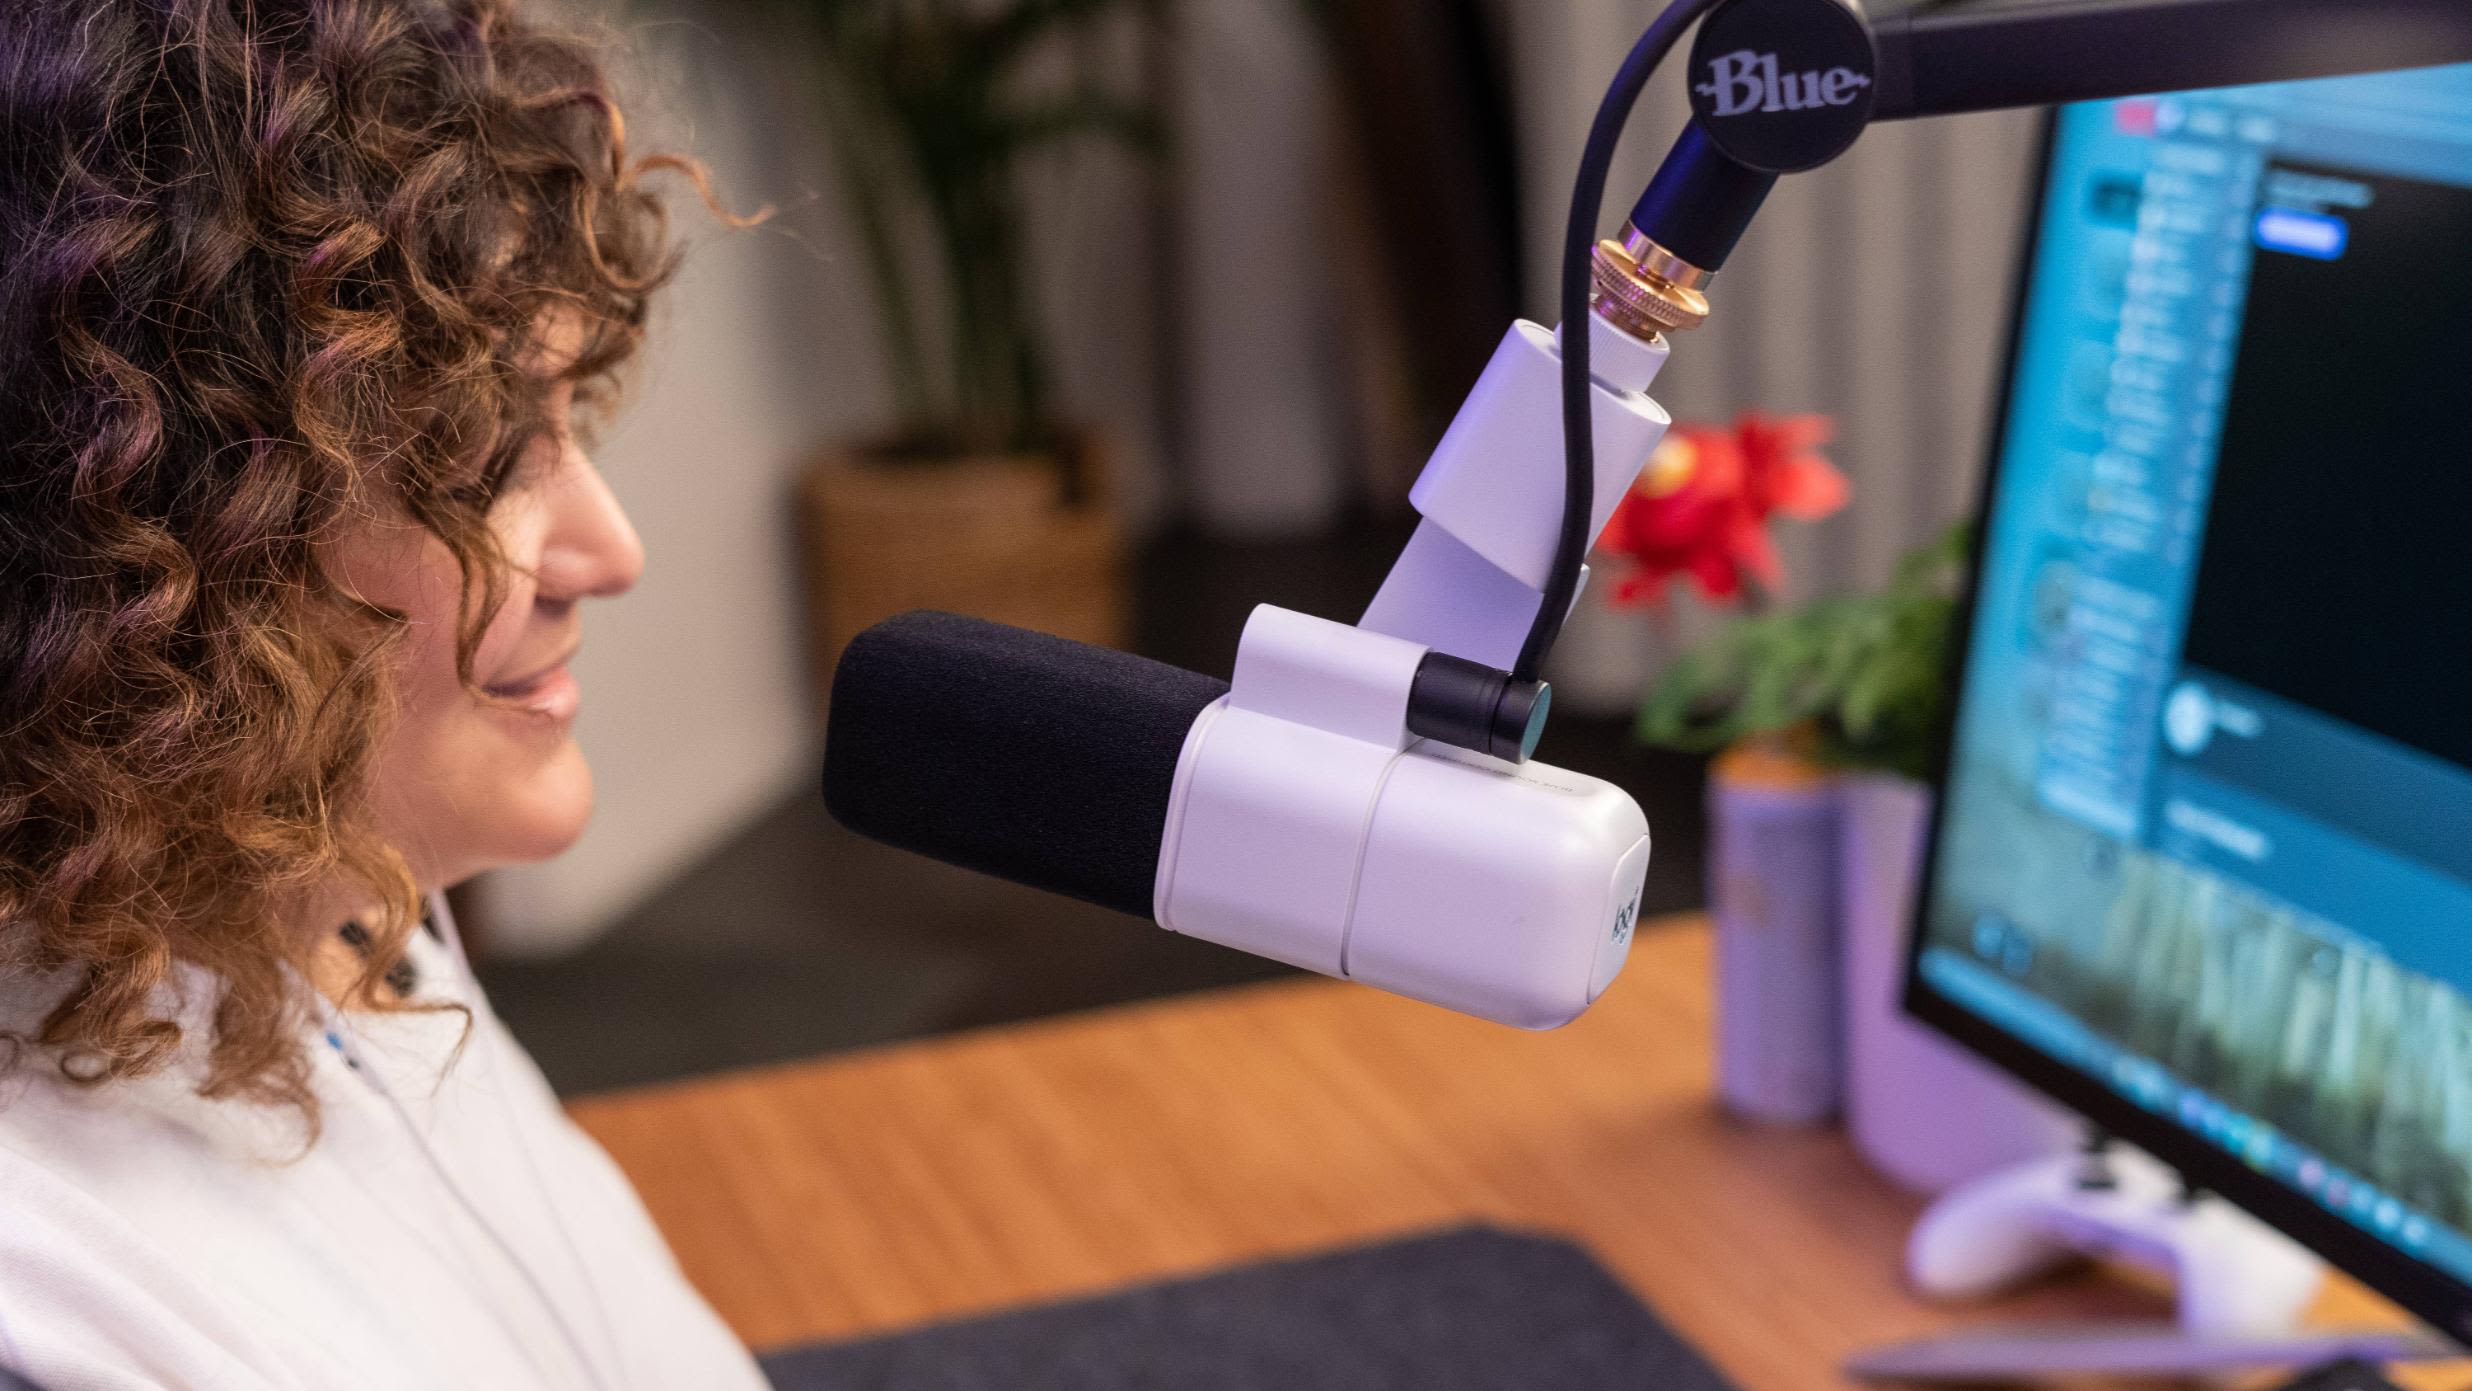 Logitech Launches The New Blue Sona XLR Microphone And Litra Beam Key Light